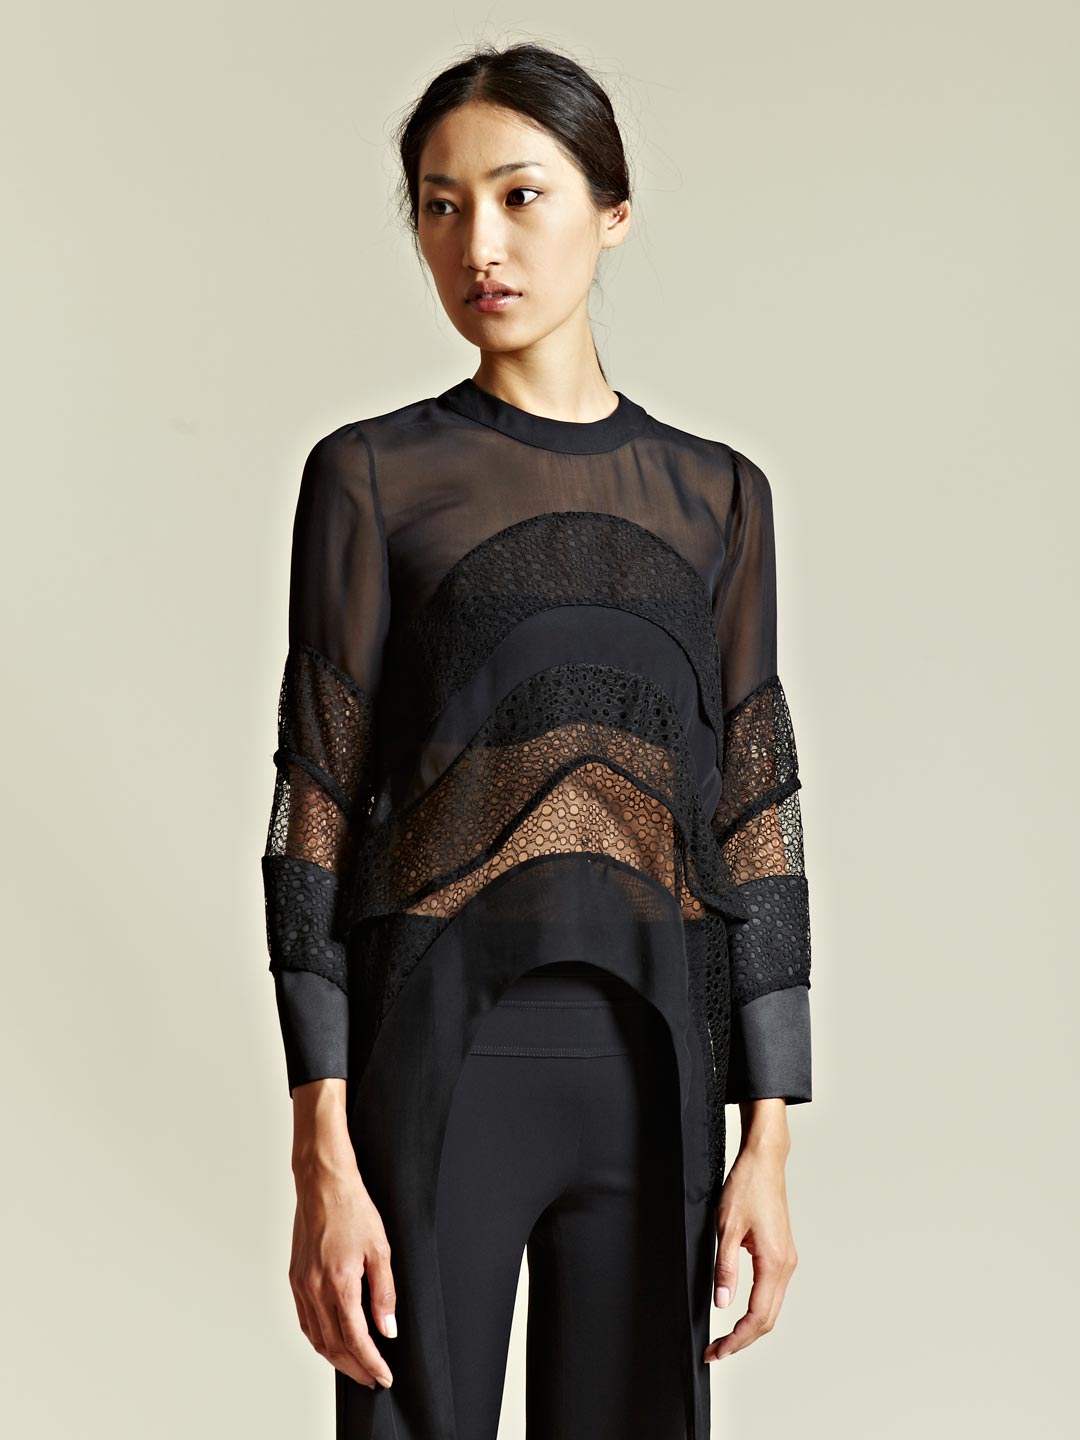 Lyst - Givenchy Givenchy Womens Circle Curve Top in Black